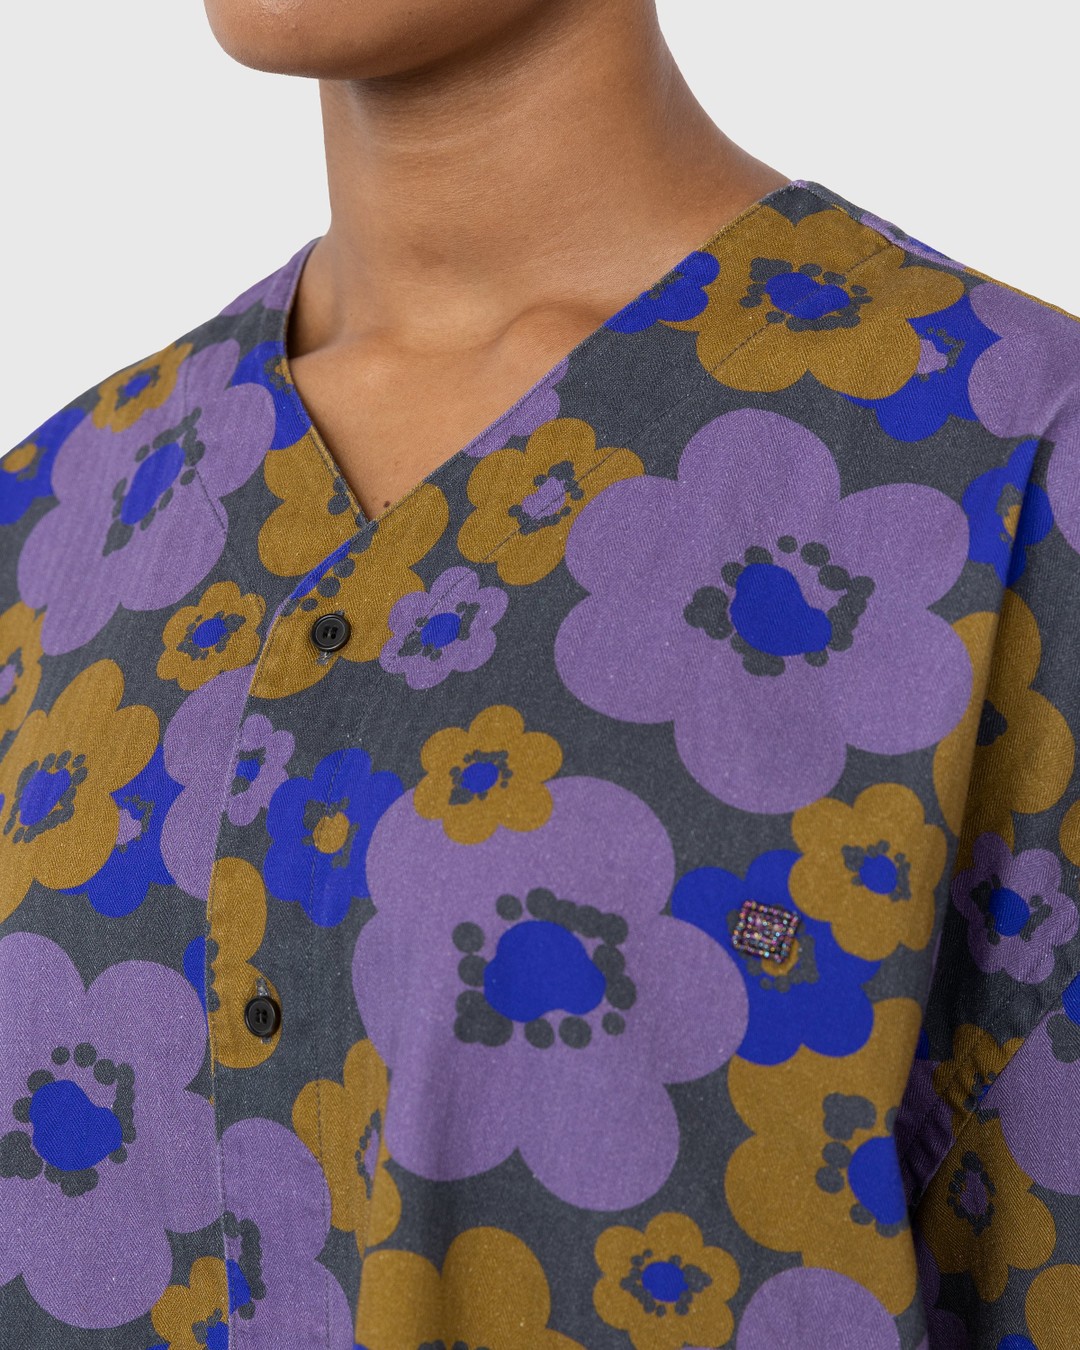 Acne Studios – Floral Short-Sleeve Button-Up Purple/Brown - Shortsleeve Shirts - Multi - Image 5